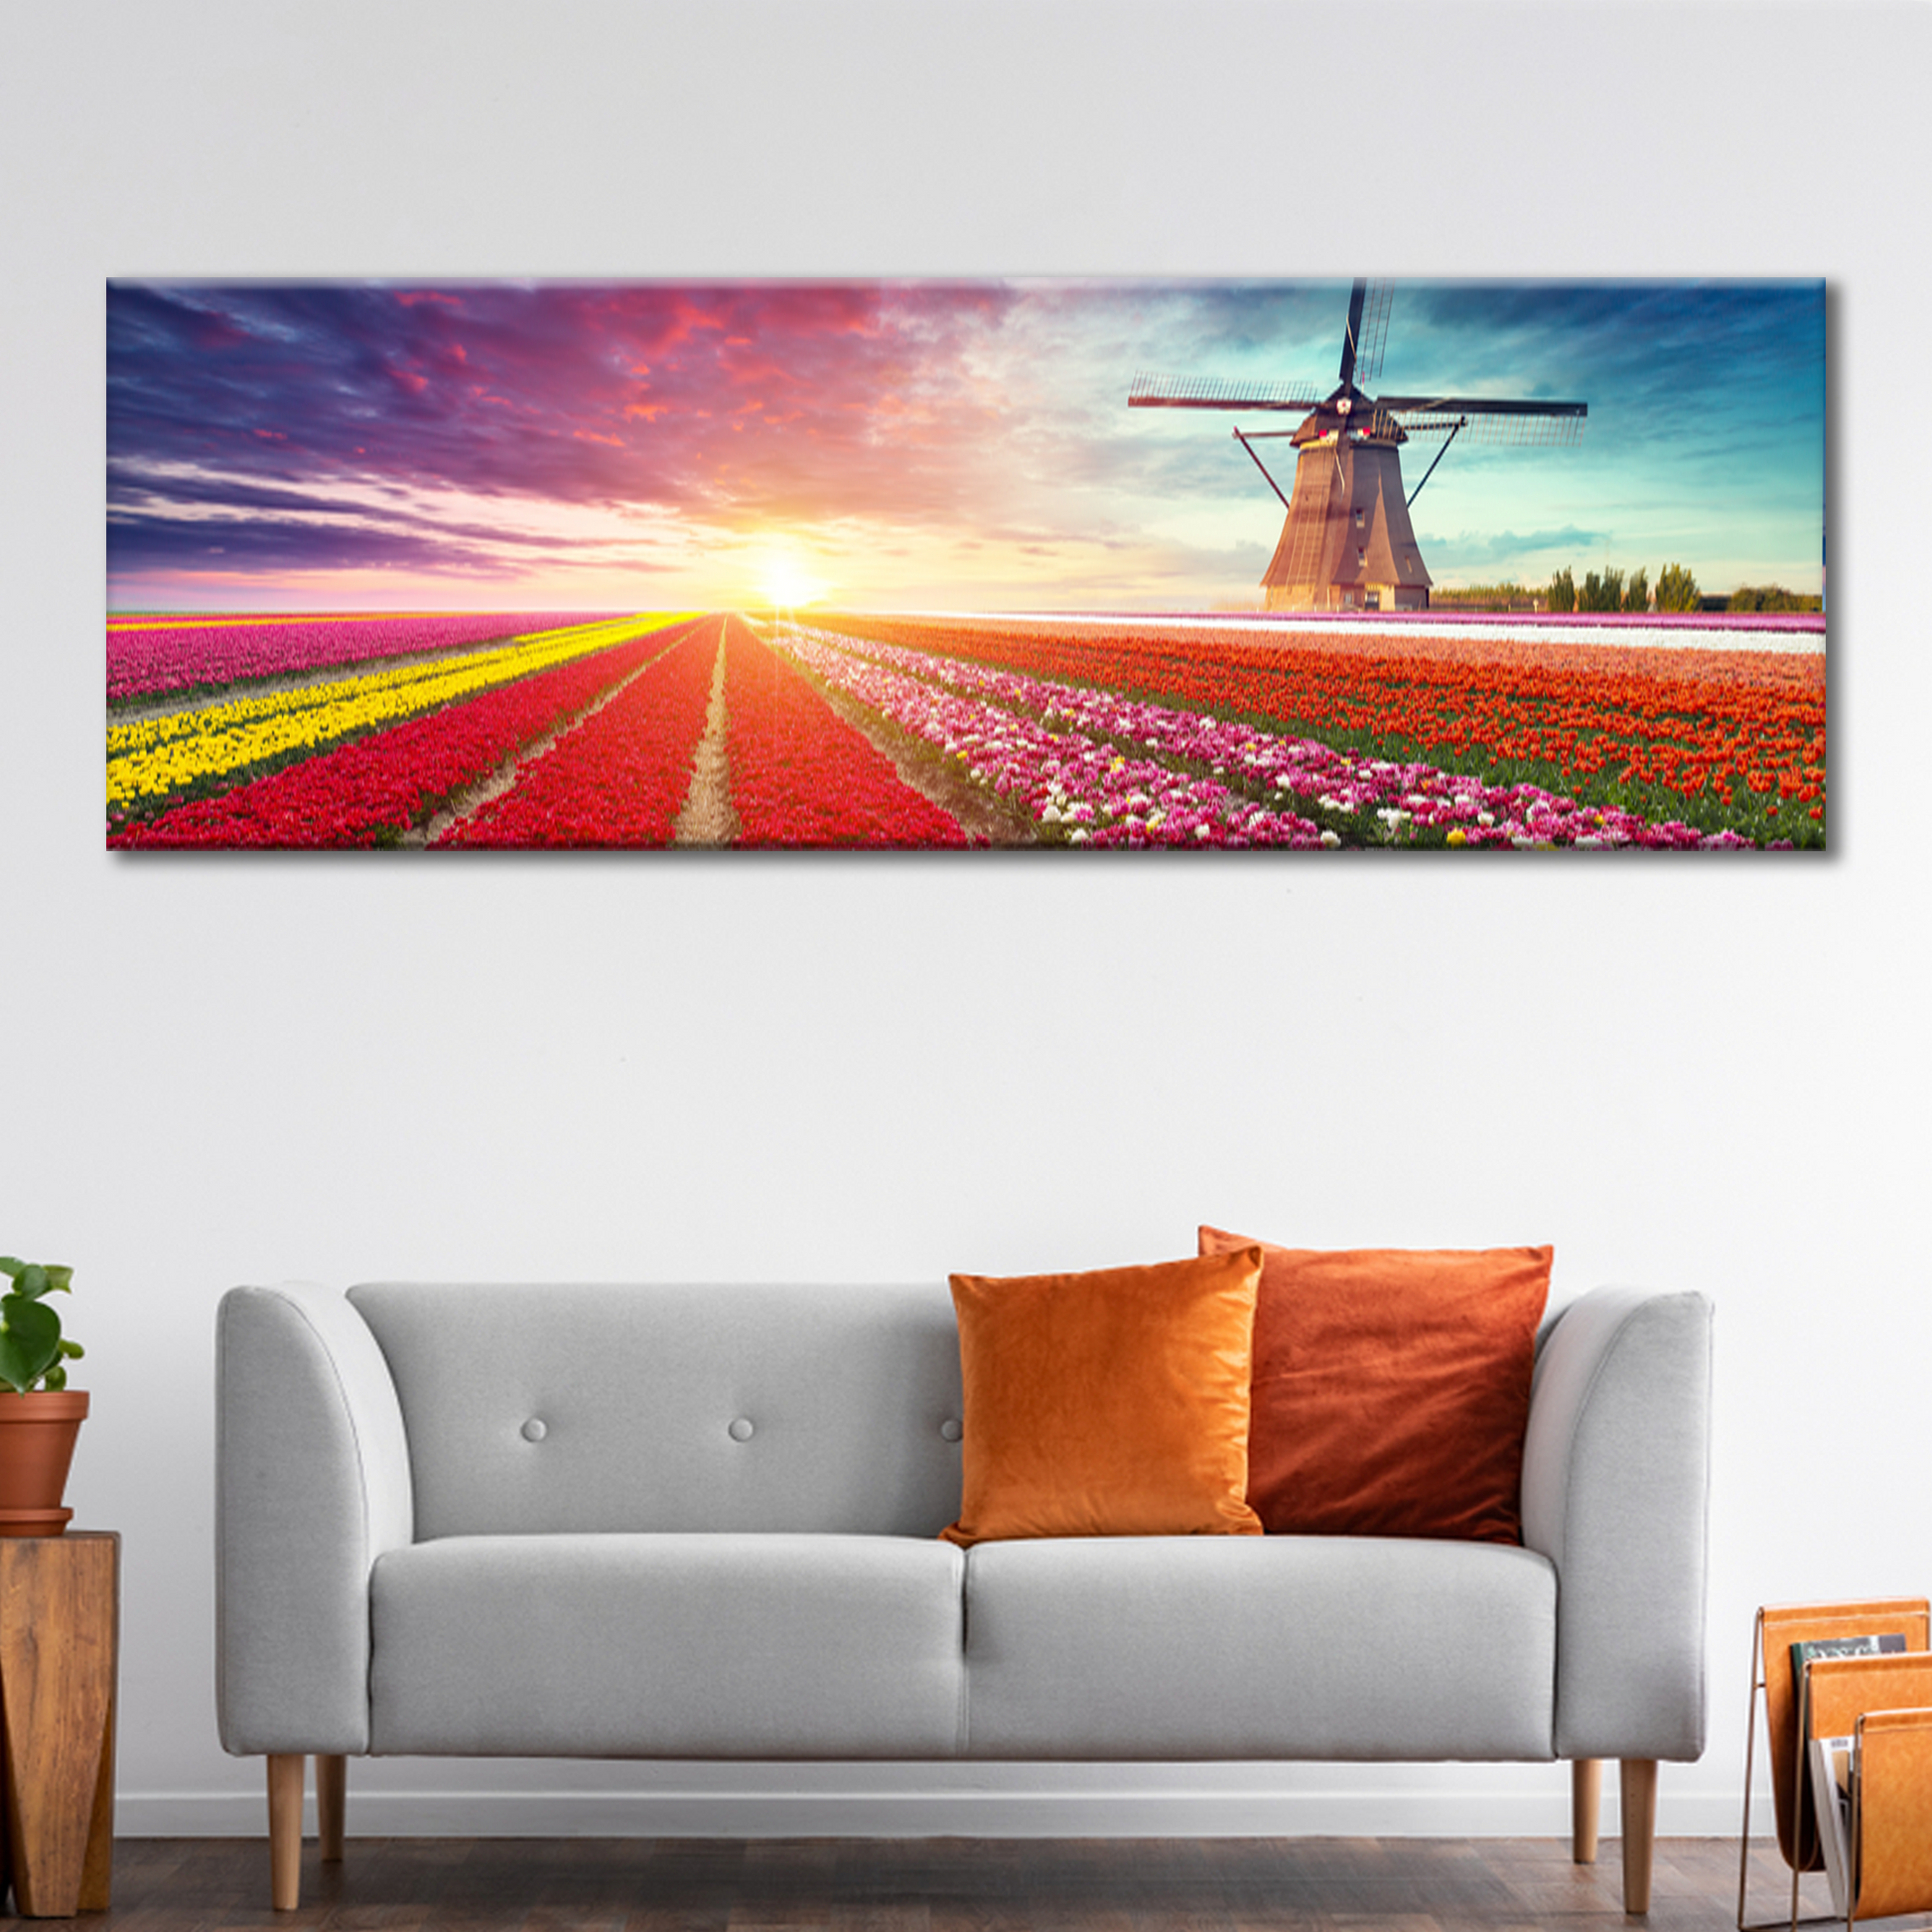 Windmill Scenery Canvas Wall Art - Image by Tailored Canvases